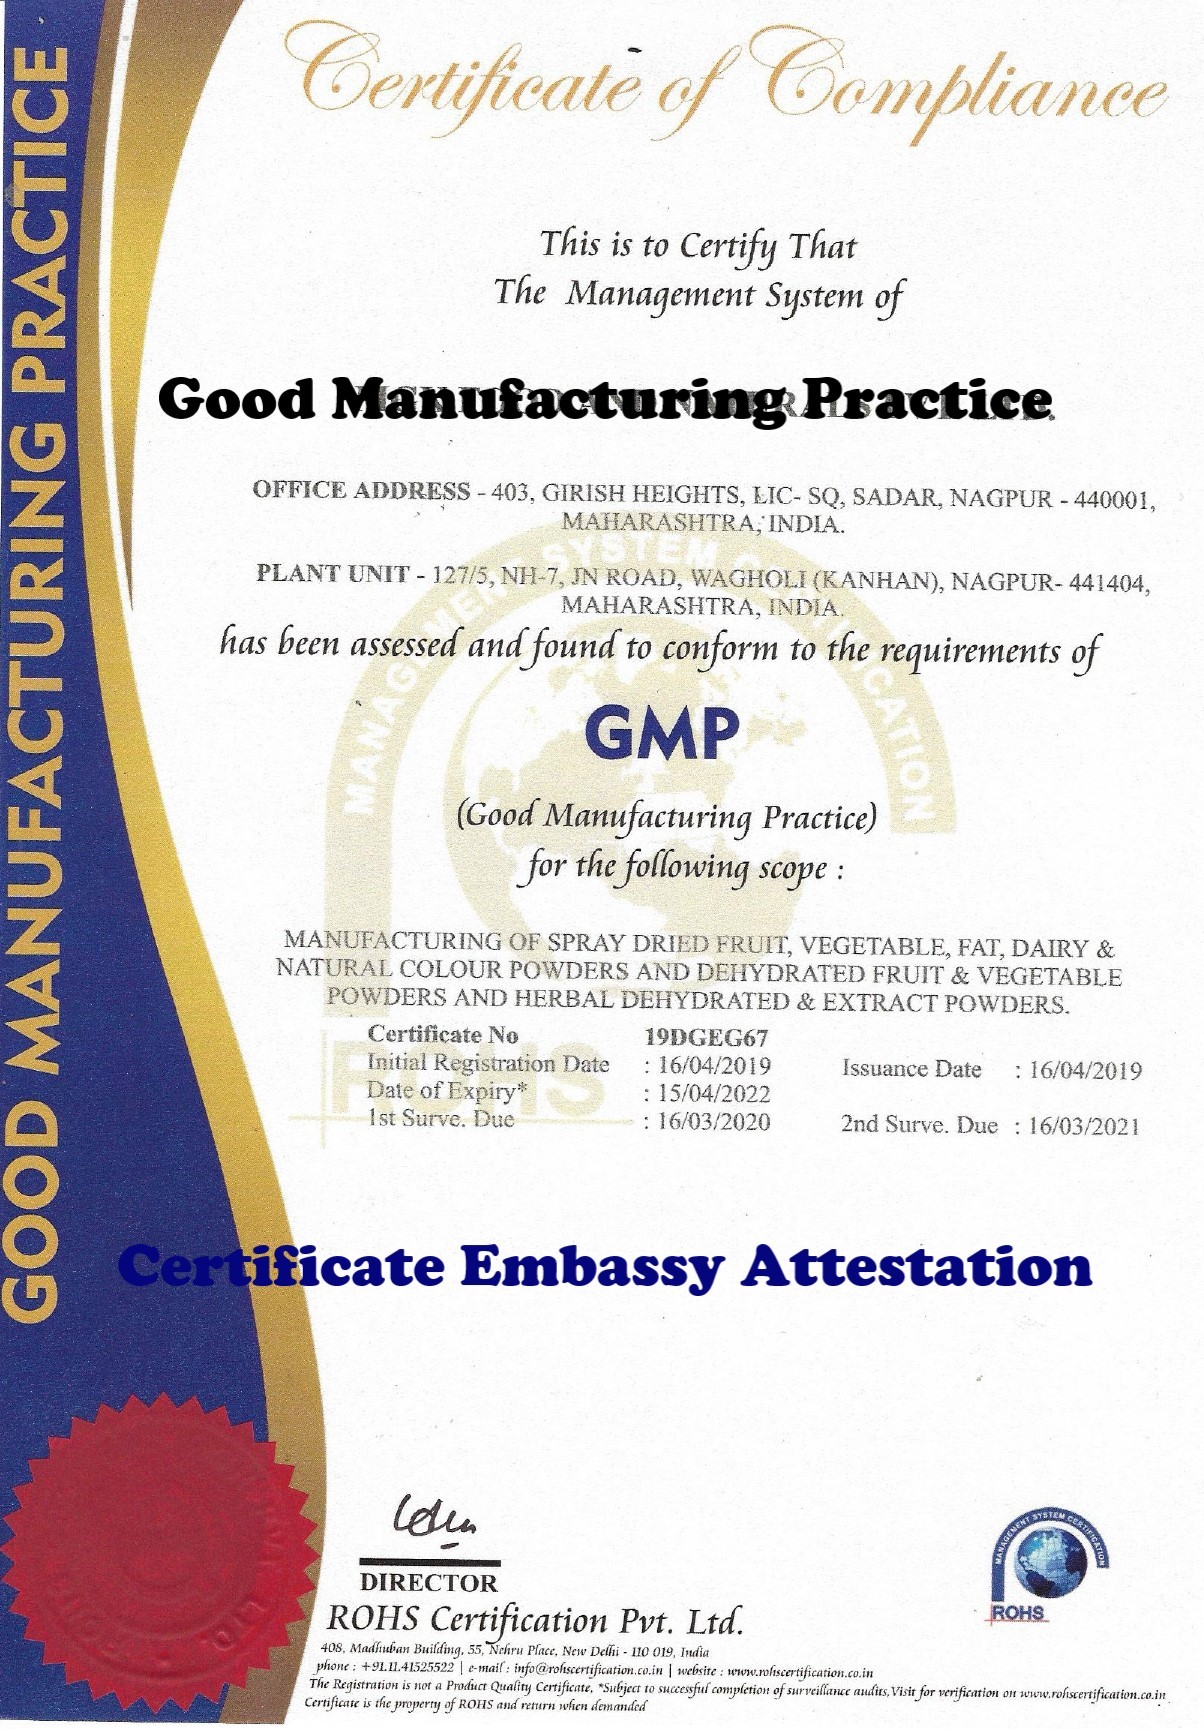 GMP Certificate Attestation from Thailand Embassy